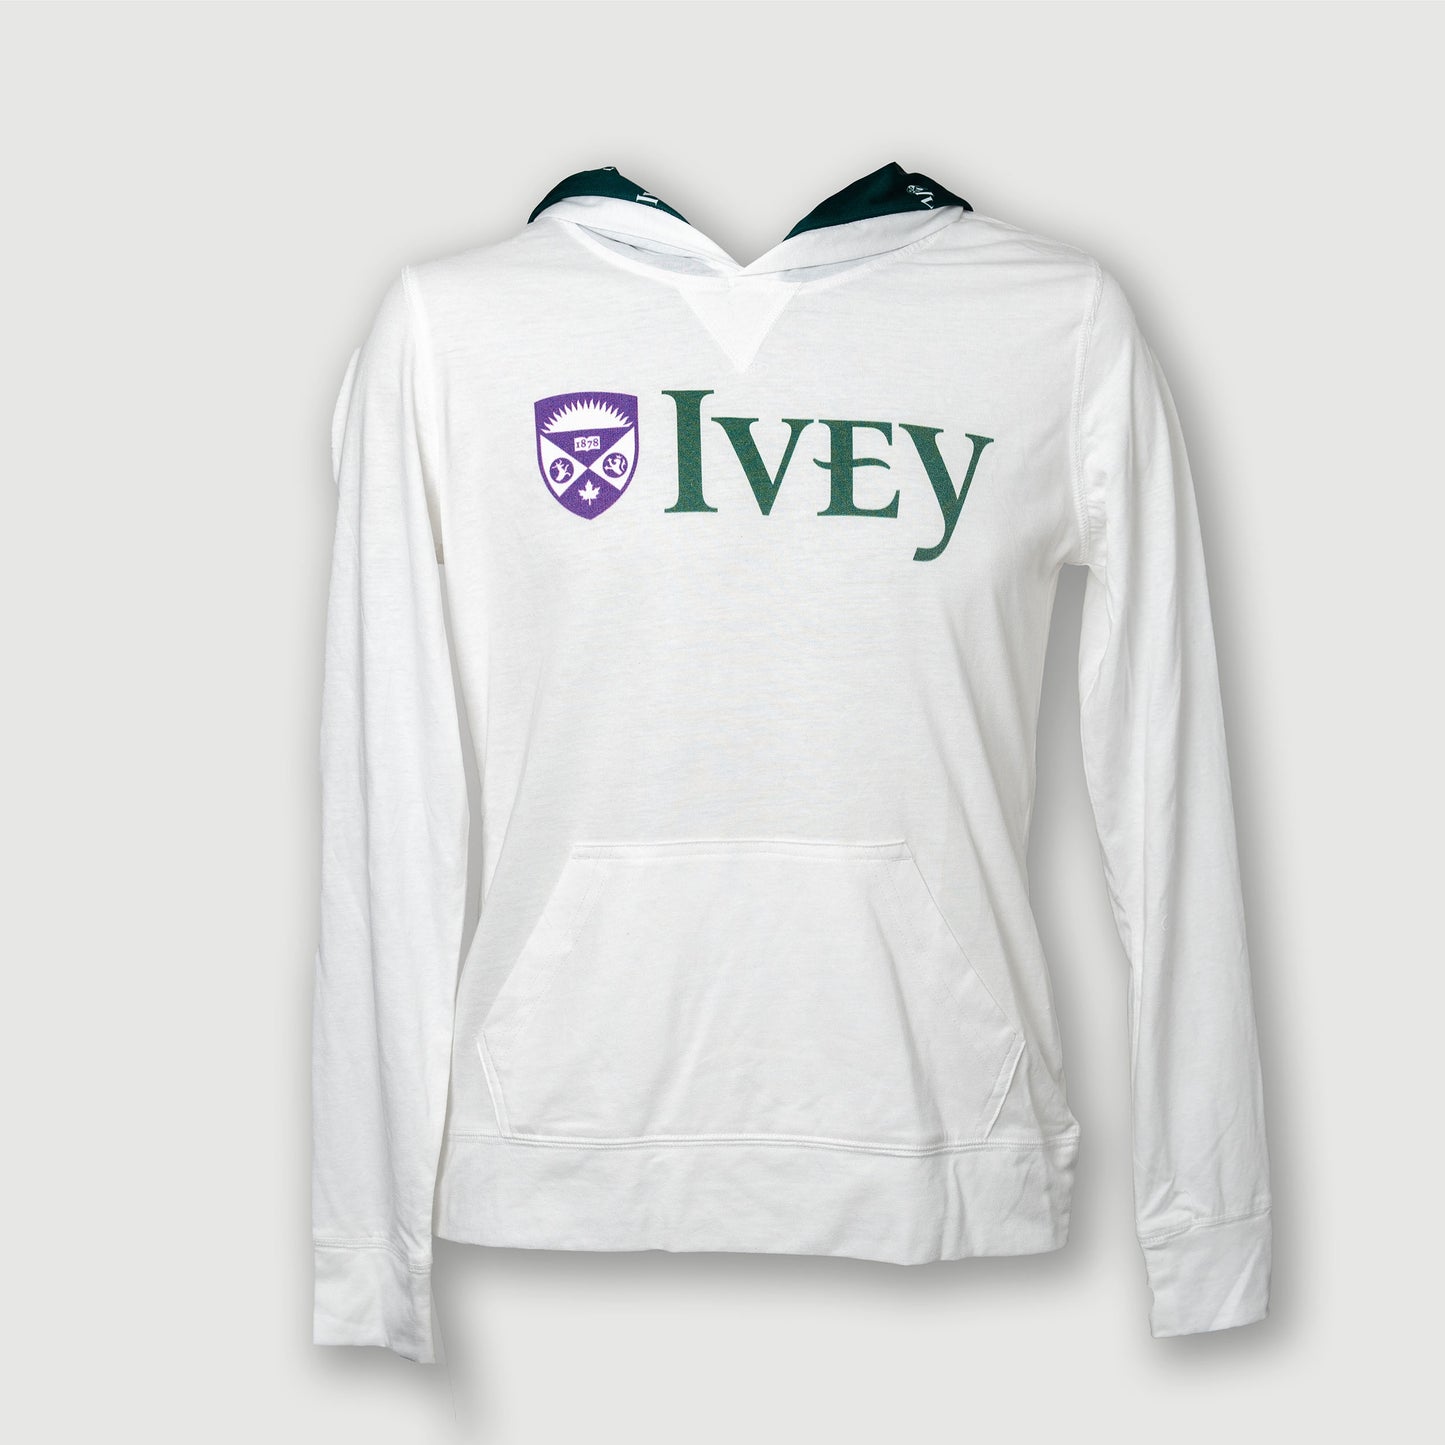 Ivey Women's Recovery Hooded Tee